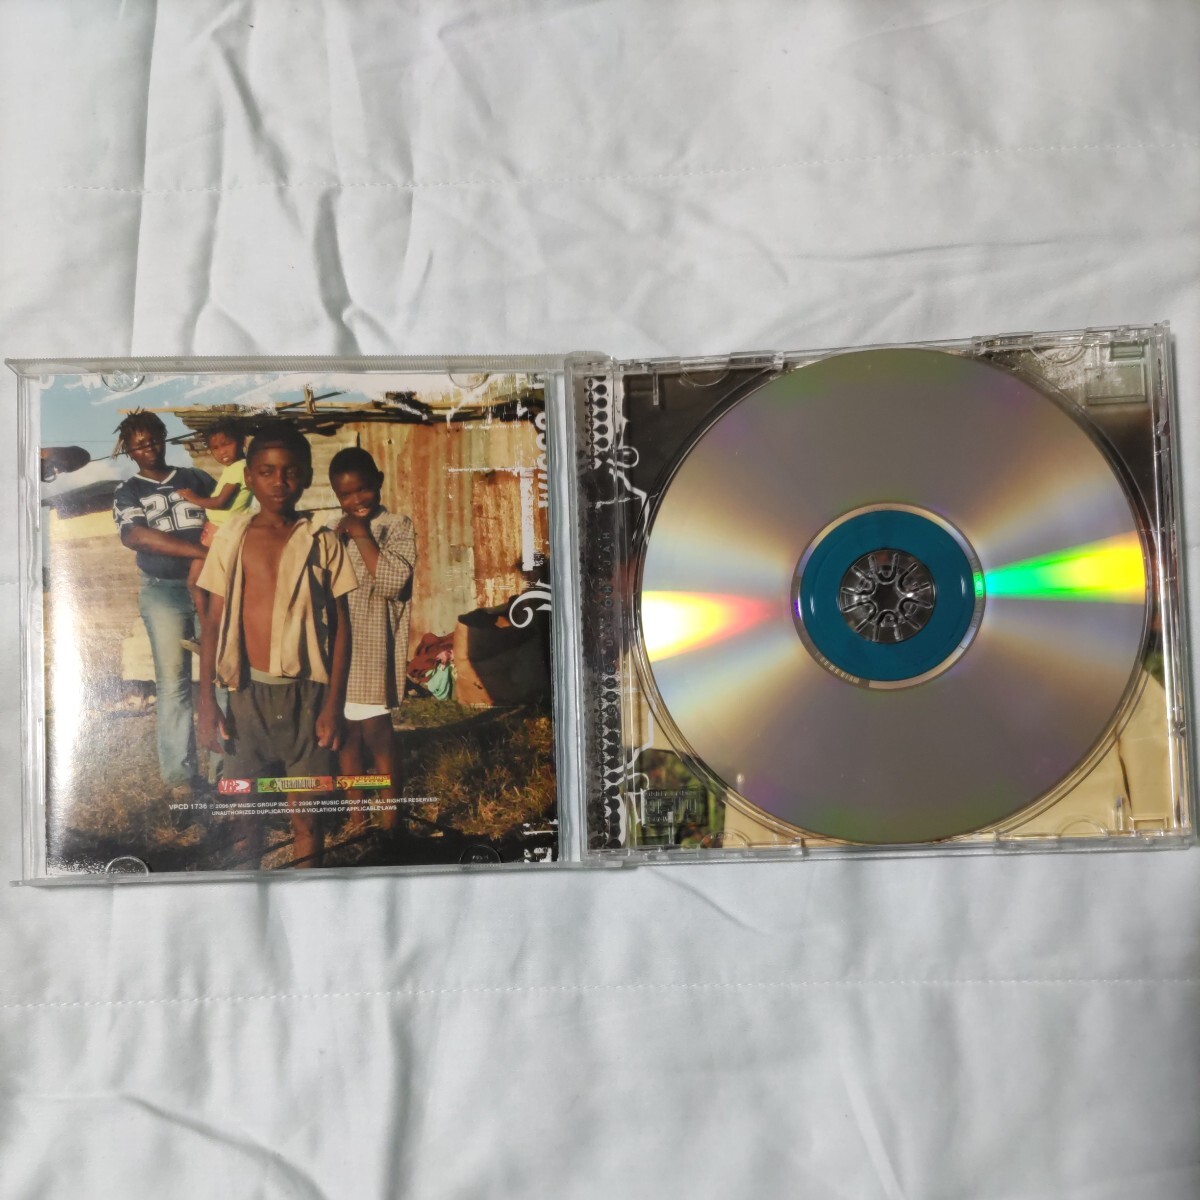 CD「Cocoa TEA SAVE US OH JAH」1.STAY FAR 2.SAVE US OH JAH 3.LET THE MUSIC PLAY 4.INDIAN ｗｏｍａｎ_画像4